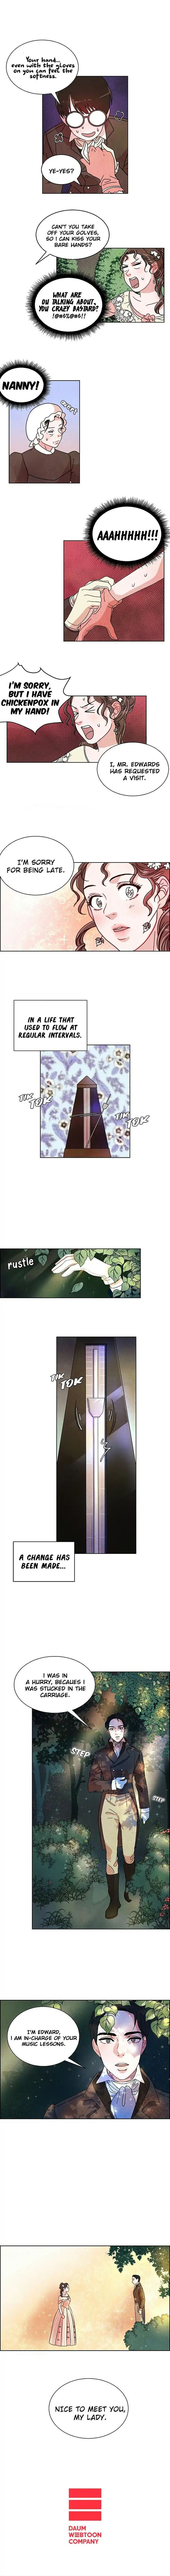 Glass Wall Chapter 1 page 9